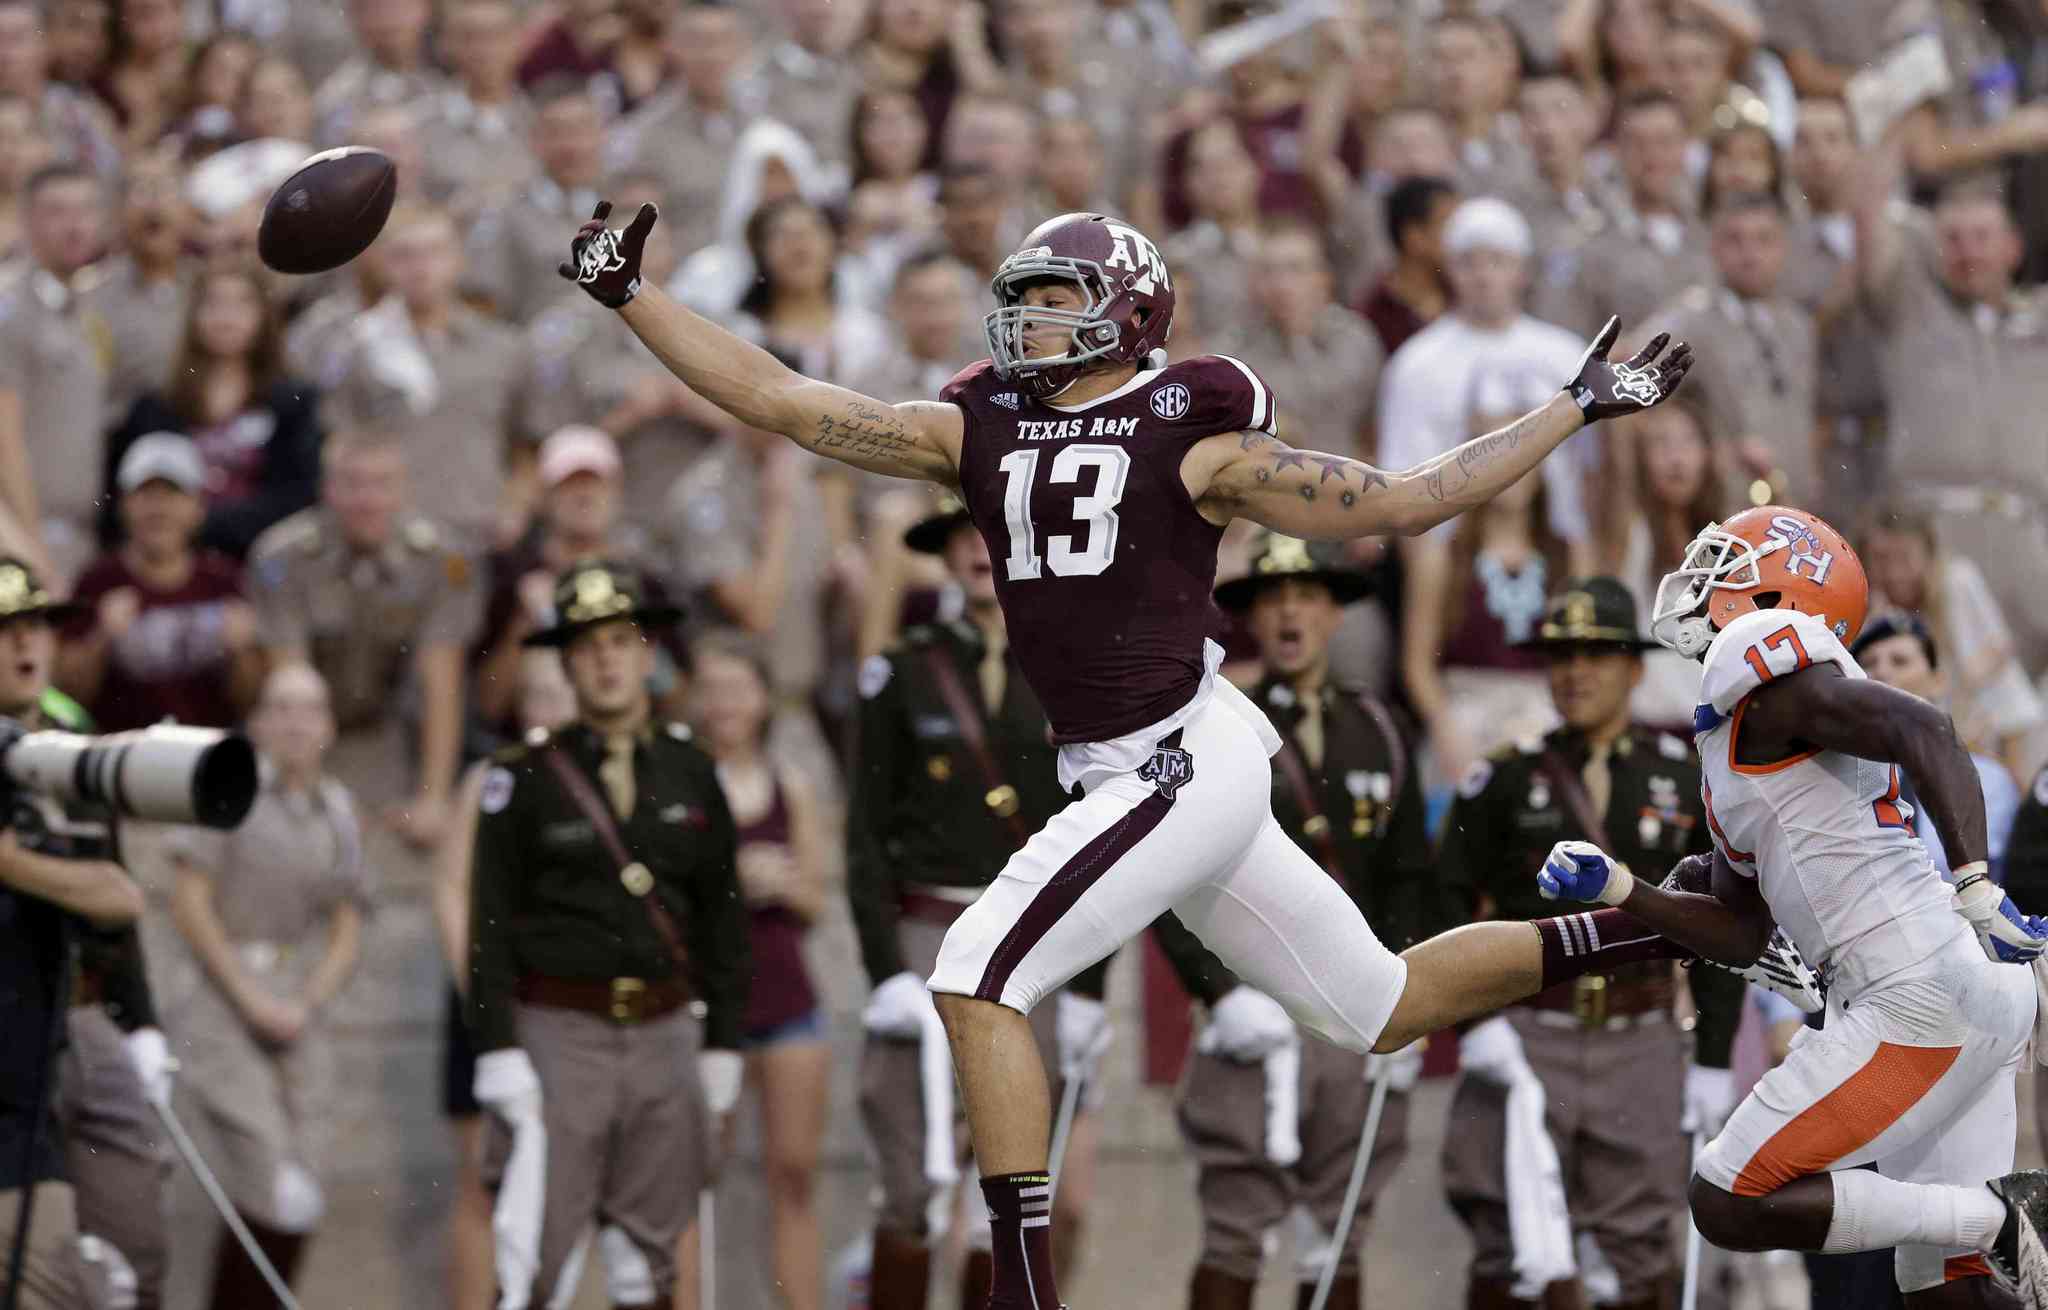 Texas A&M player to watch against Alabama: WR Mike Evans